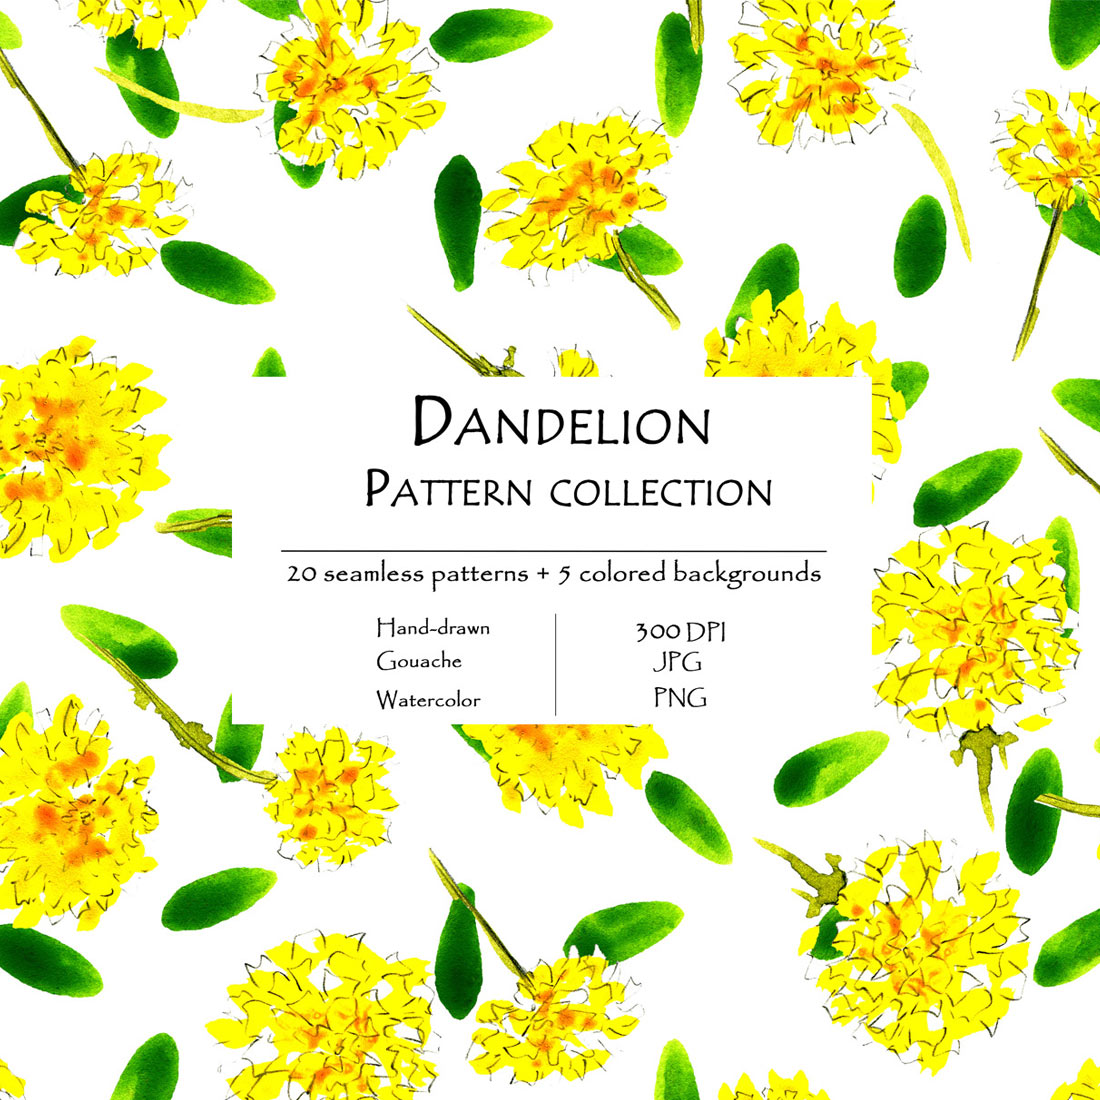 Dandelion Pattern Collection Of 20 Seamless Patterns And 5 Colored Background Cover Image.